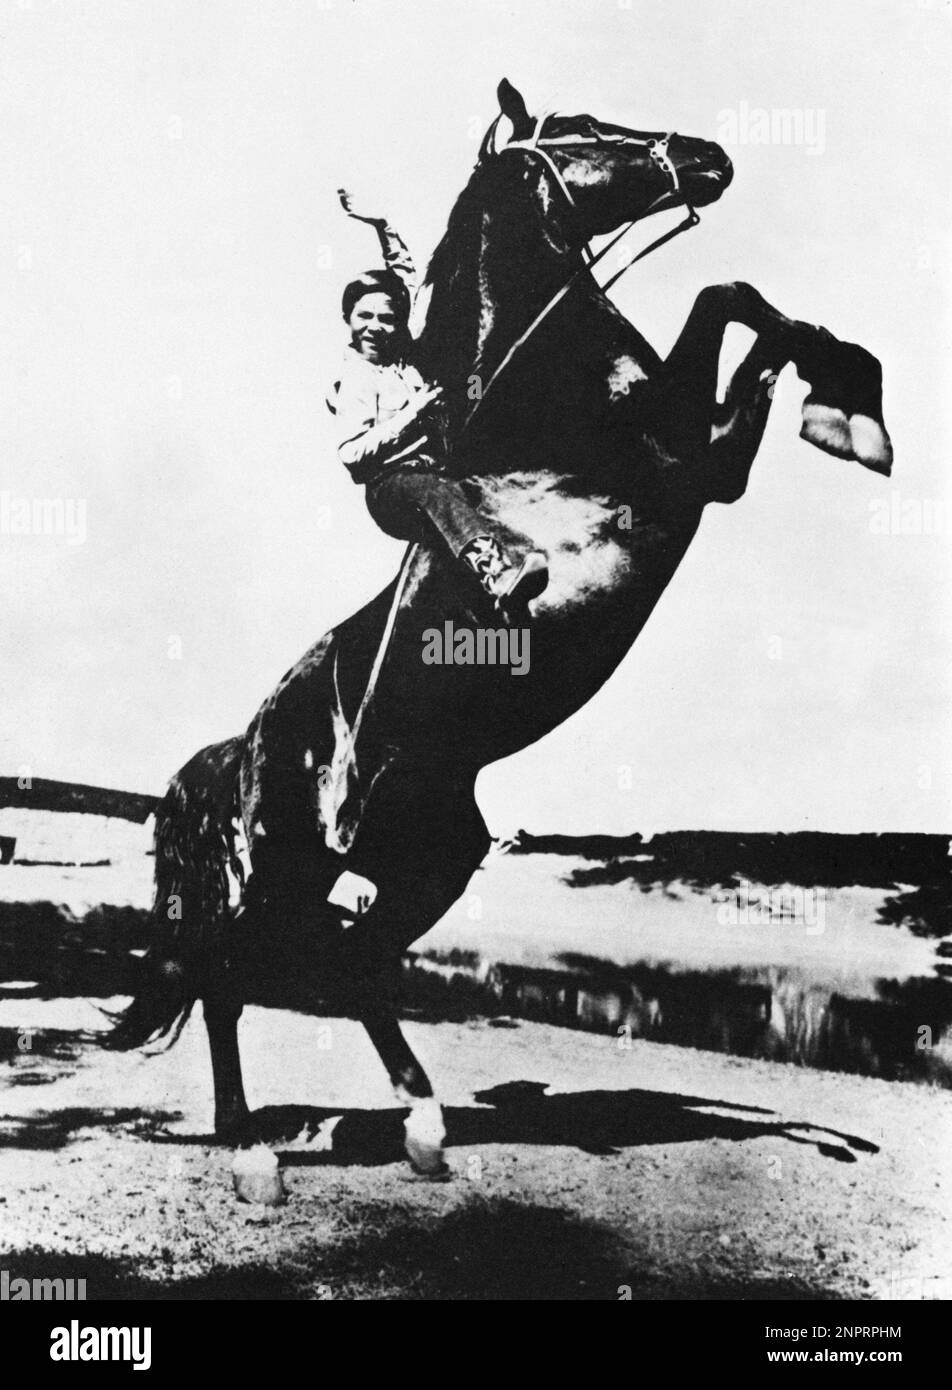 1950 : The young actor BOBBY DIAMOND ( Bob - Robert - born 23 august 1943 , Los Angeles , CA ) as Joey Newton in the TV Series FURY ( Furia cavallo del West ) from 1955 to 1960 , directed by Ray Nazarro - TELEVISIONE - TELEFILM - CINEMA - cavallo - horse -  stallone - Western ----  Archivio GBB Stock Photo